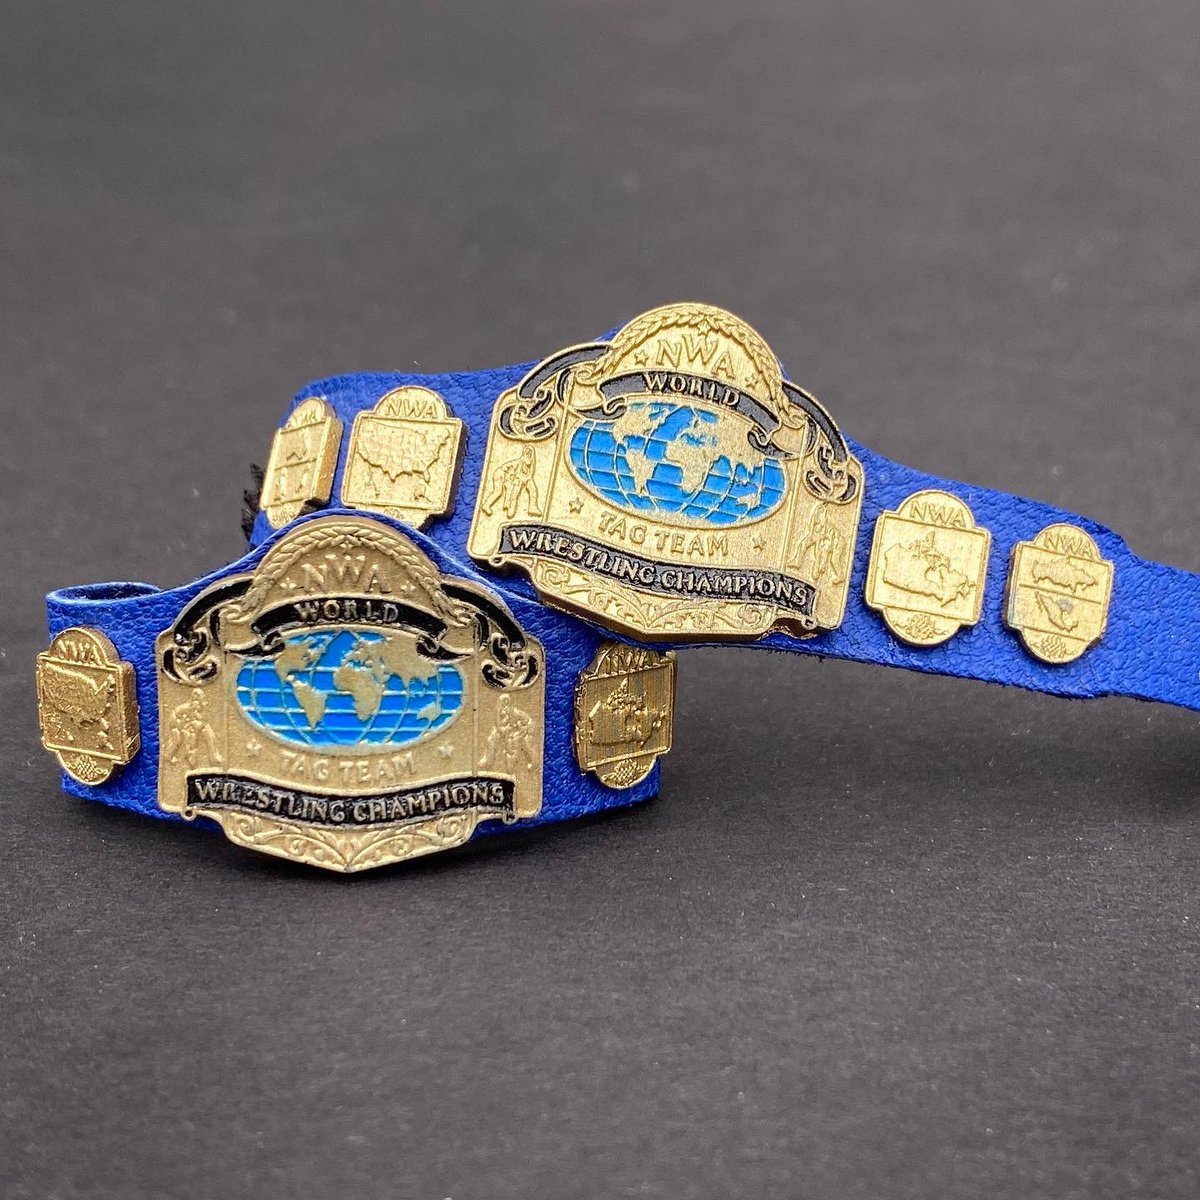 My newest custom belt creation: NWA Tag Team Championships circa mid-80s! I’ll have 5 sets on blue leather available to purchase on Friday.  #WWEEliteSquad #championshipbelts